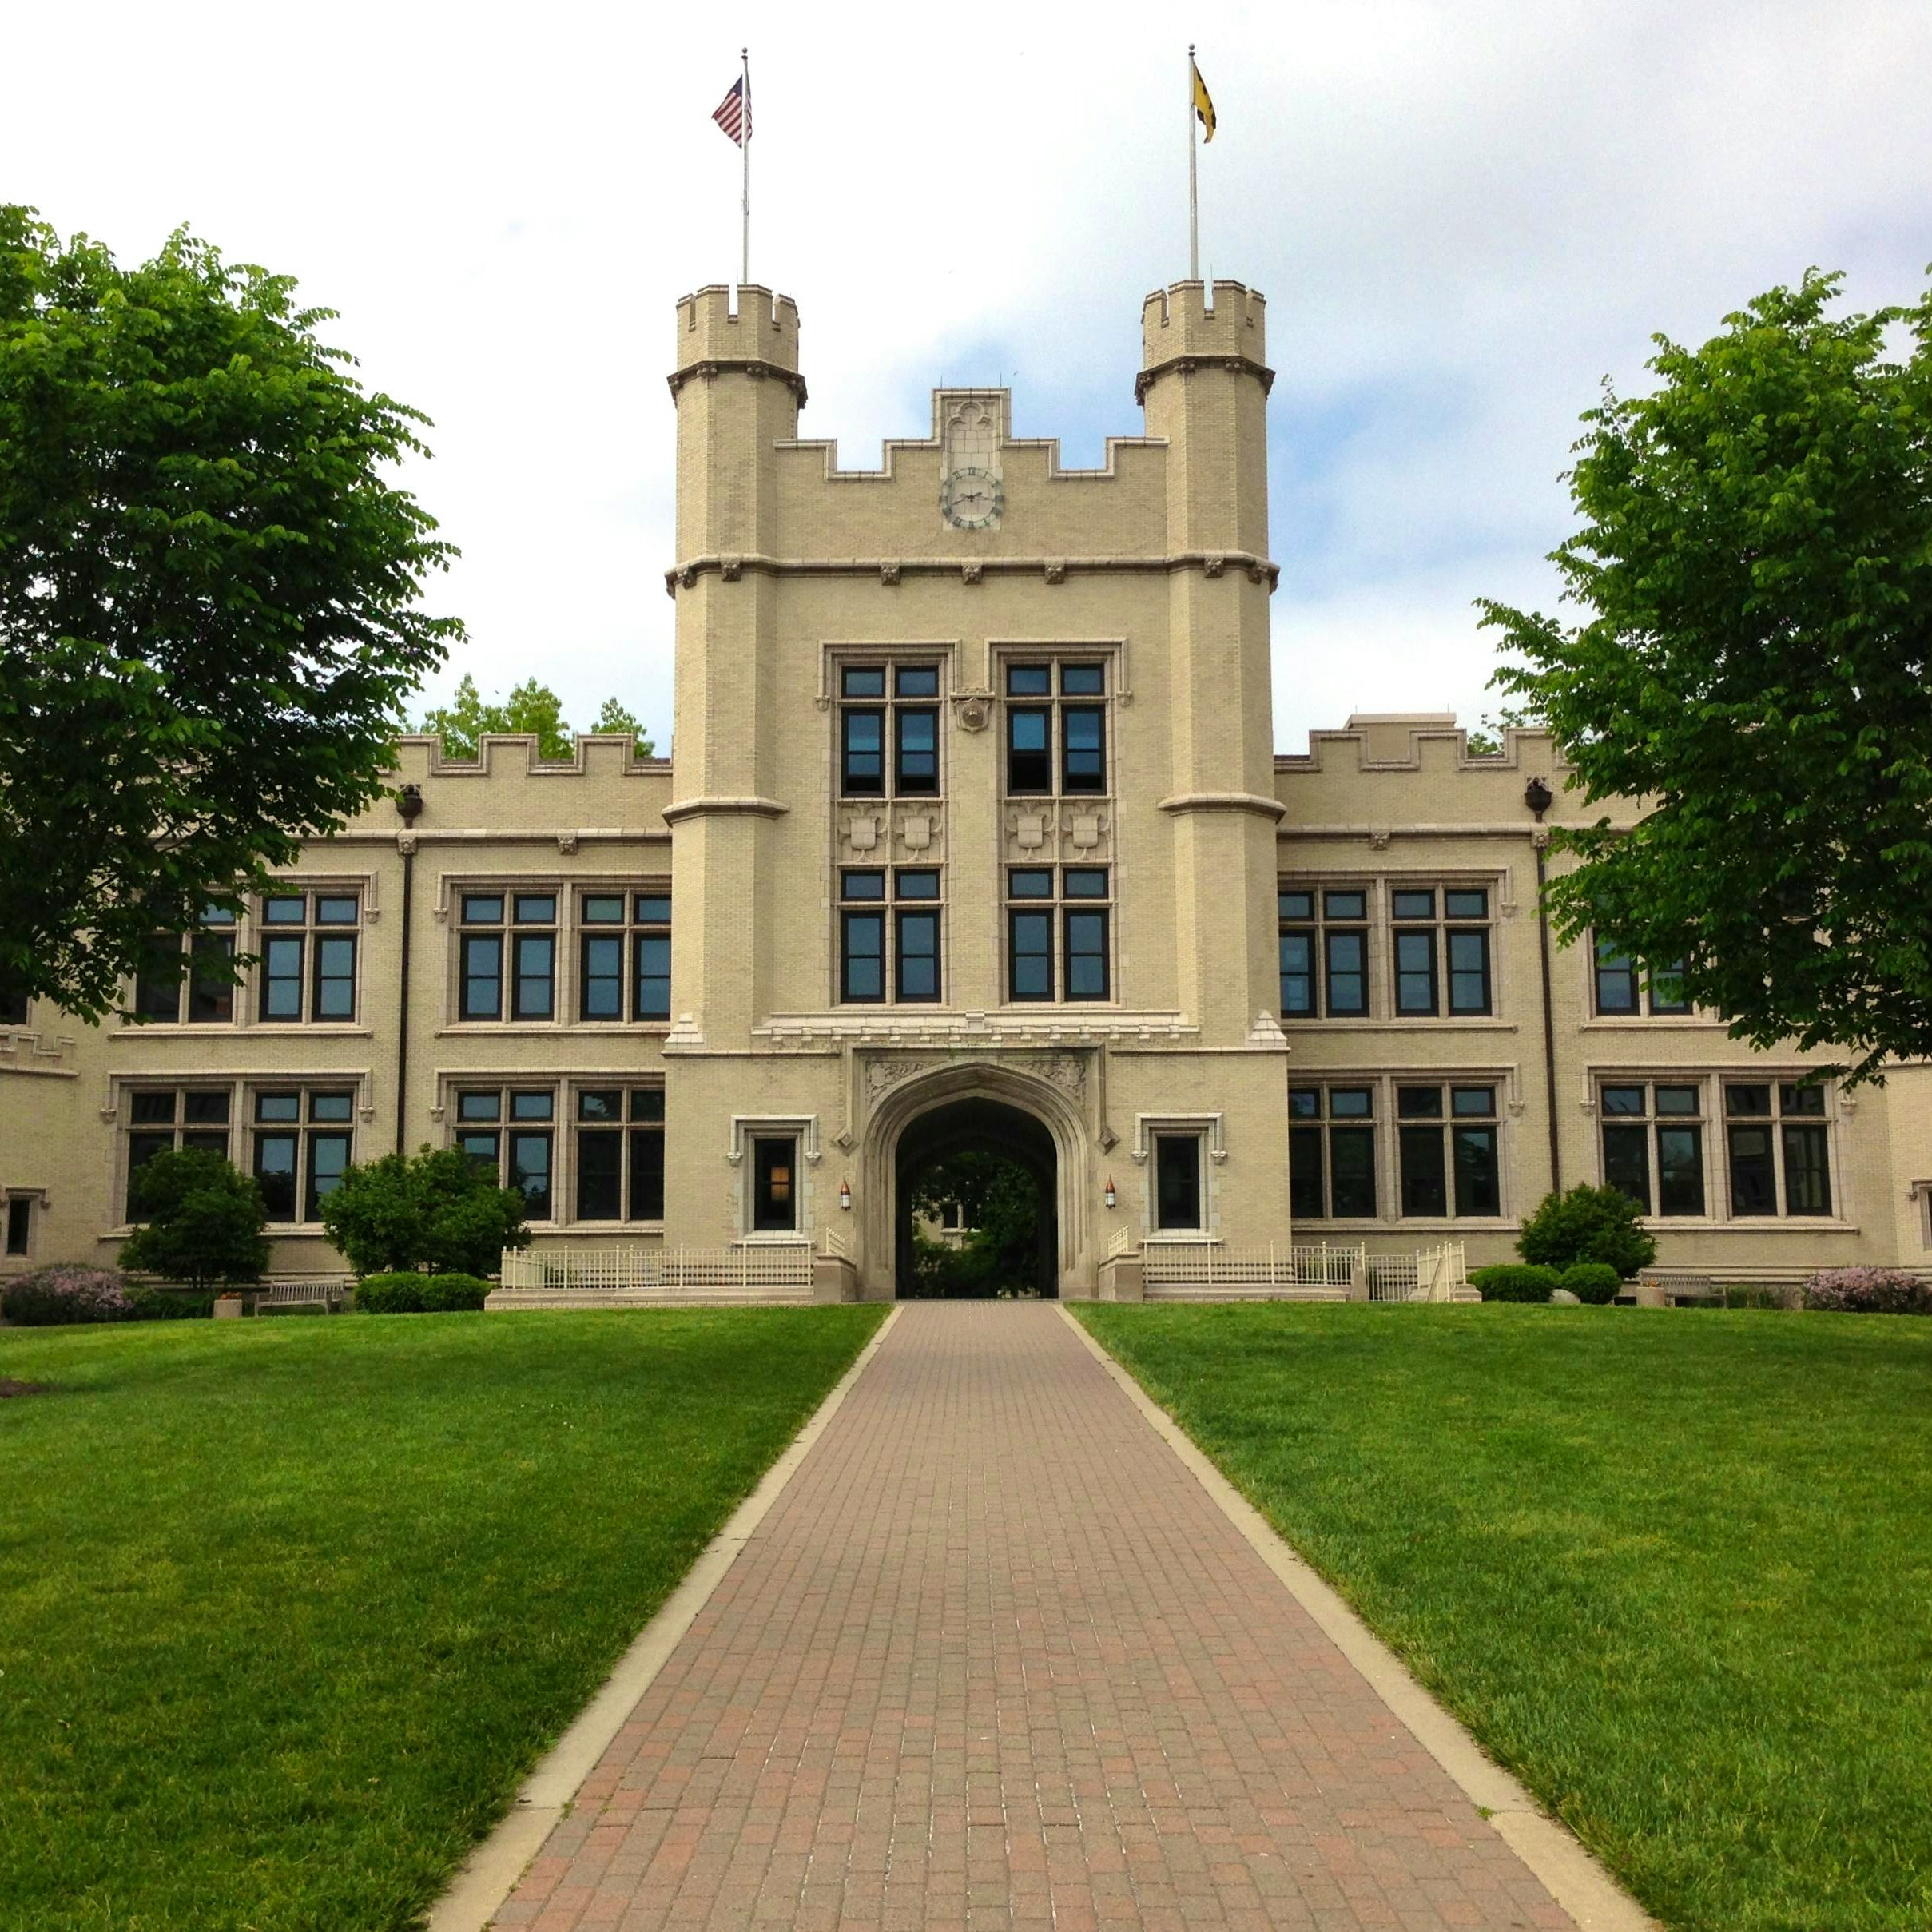 Jobs at the college of wooster